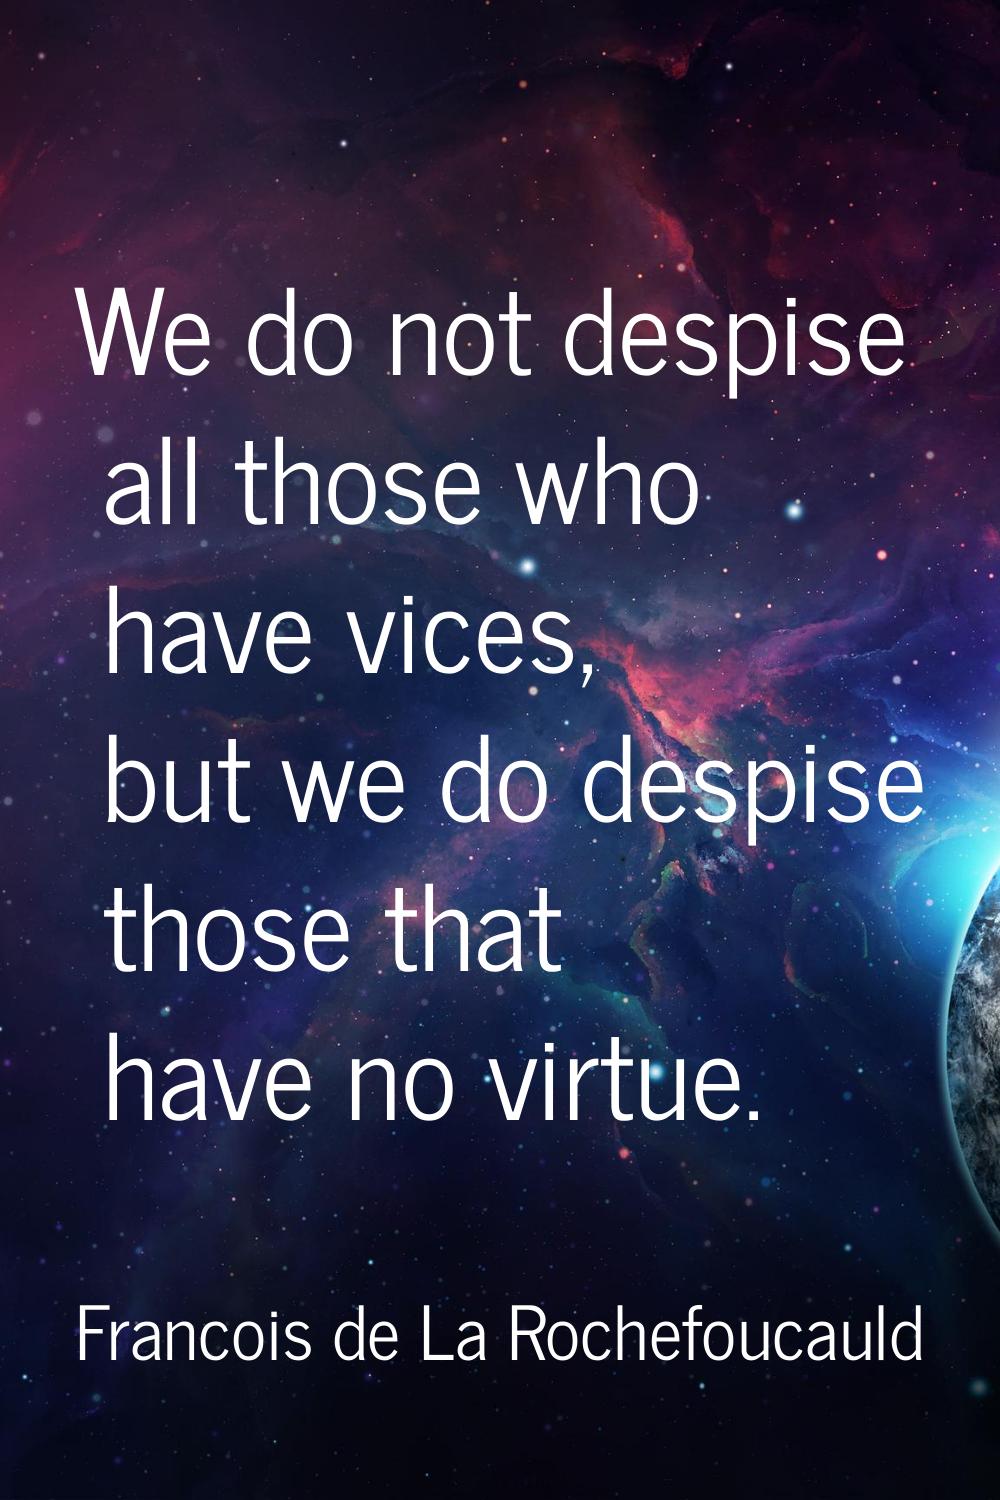 We do not despise all those who have vices, but we do despise those that have no virtue.